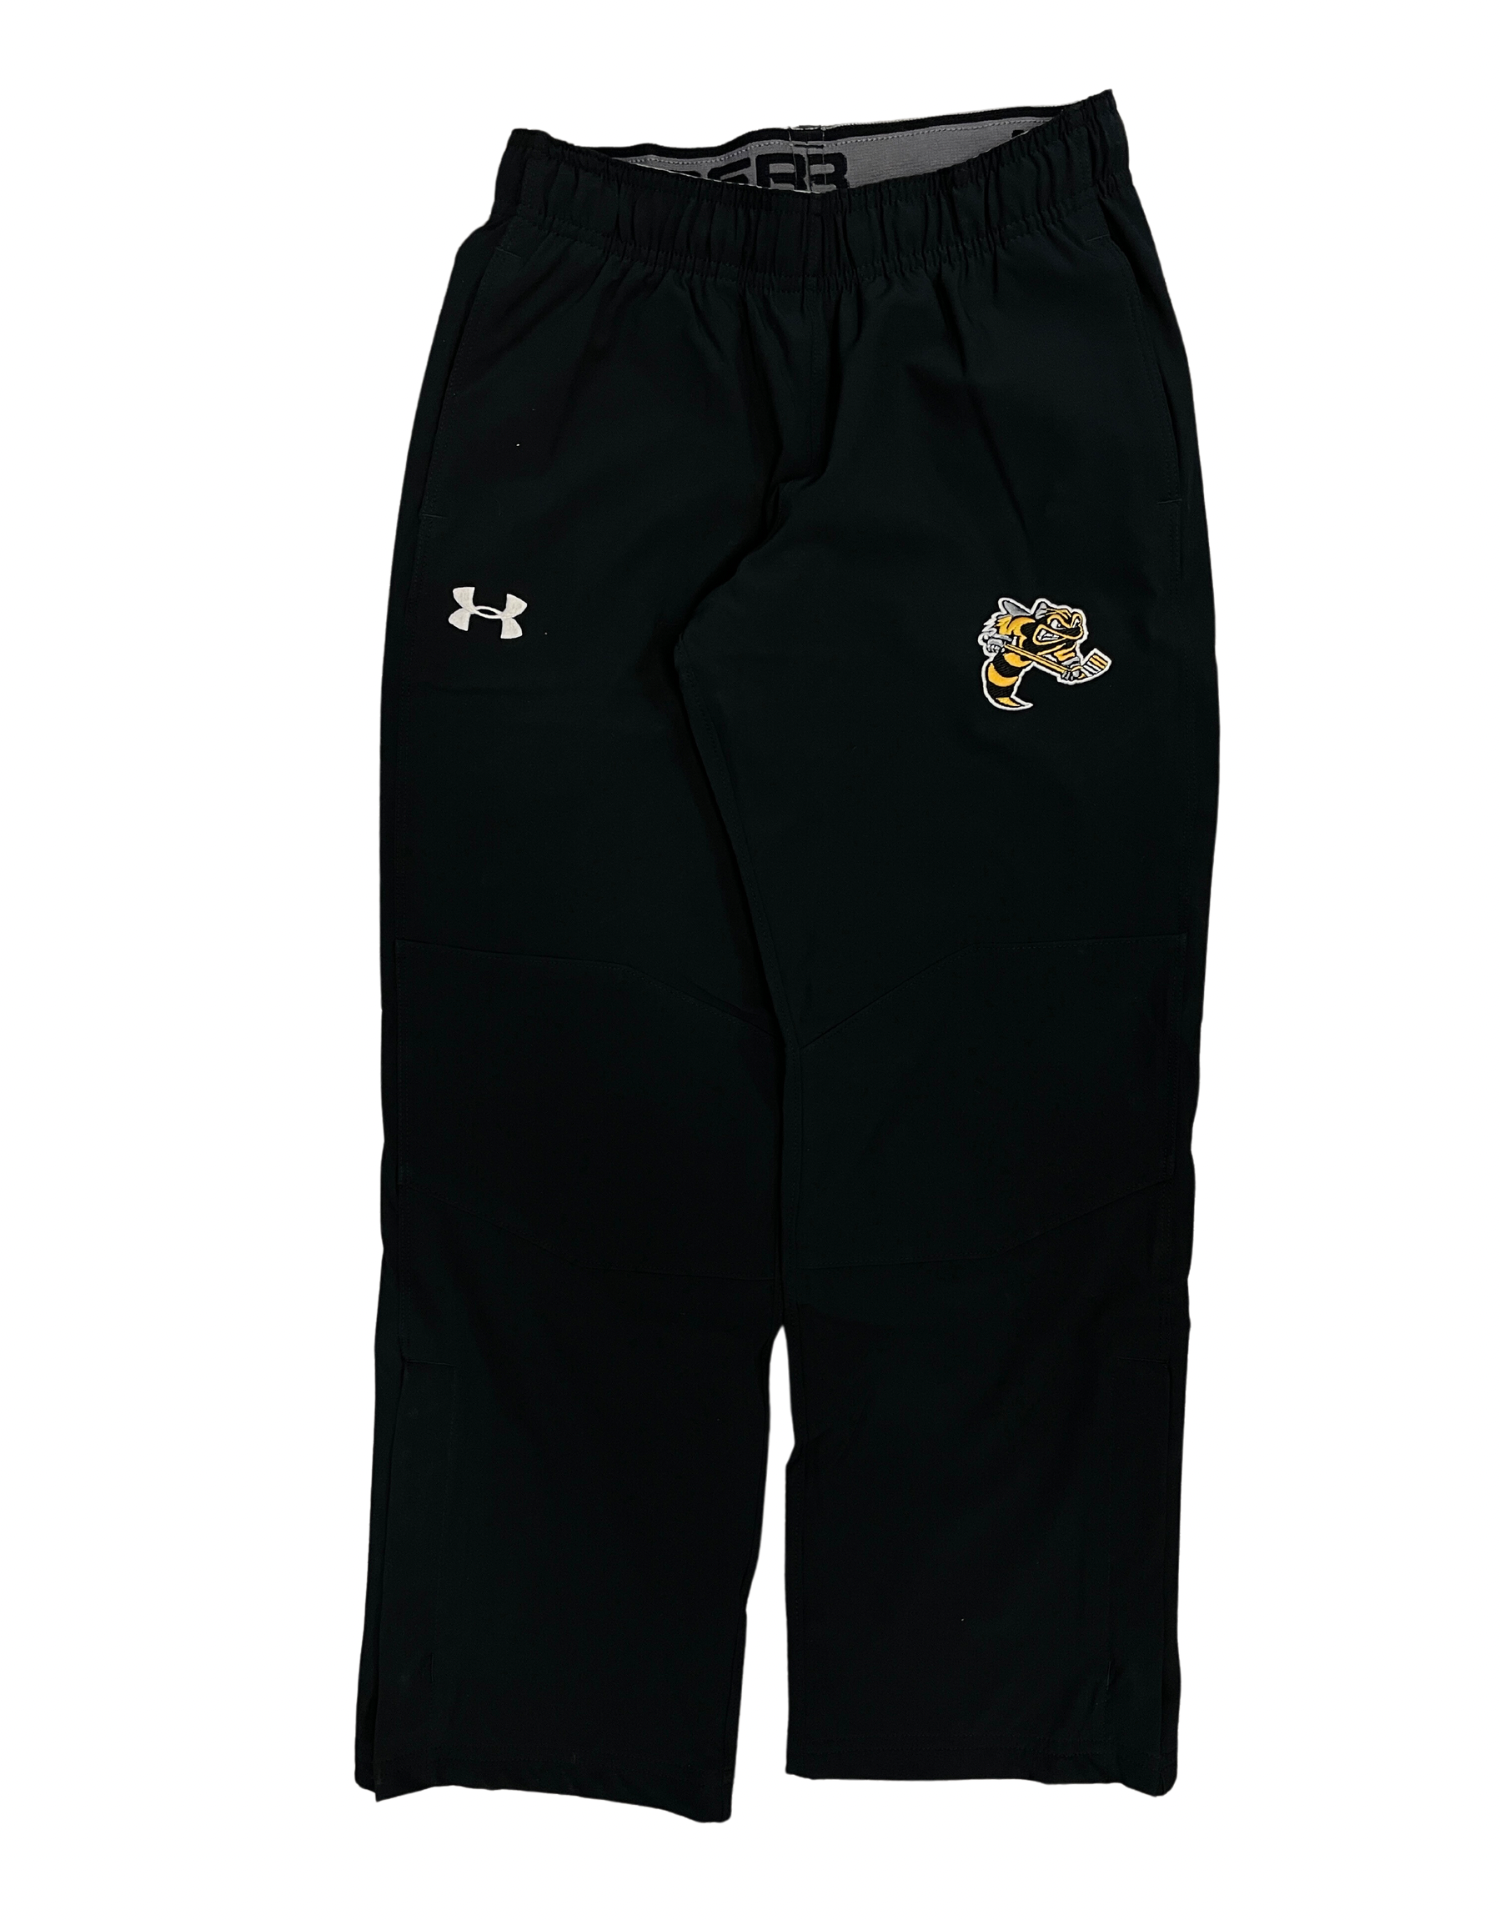 Under Armour Hockey Warm Up Pants - Youth – Sarnia Sting Shop - The HoneyPot